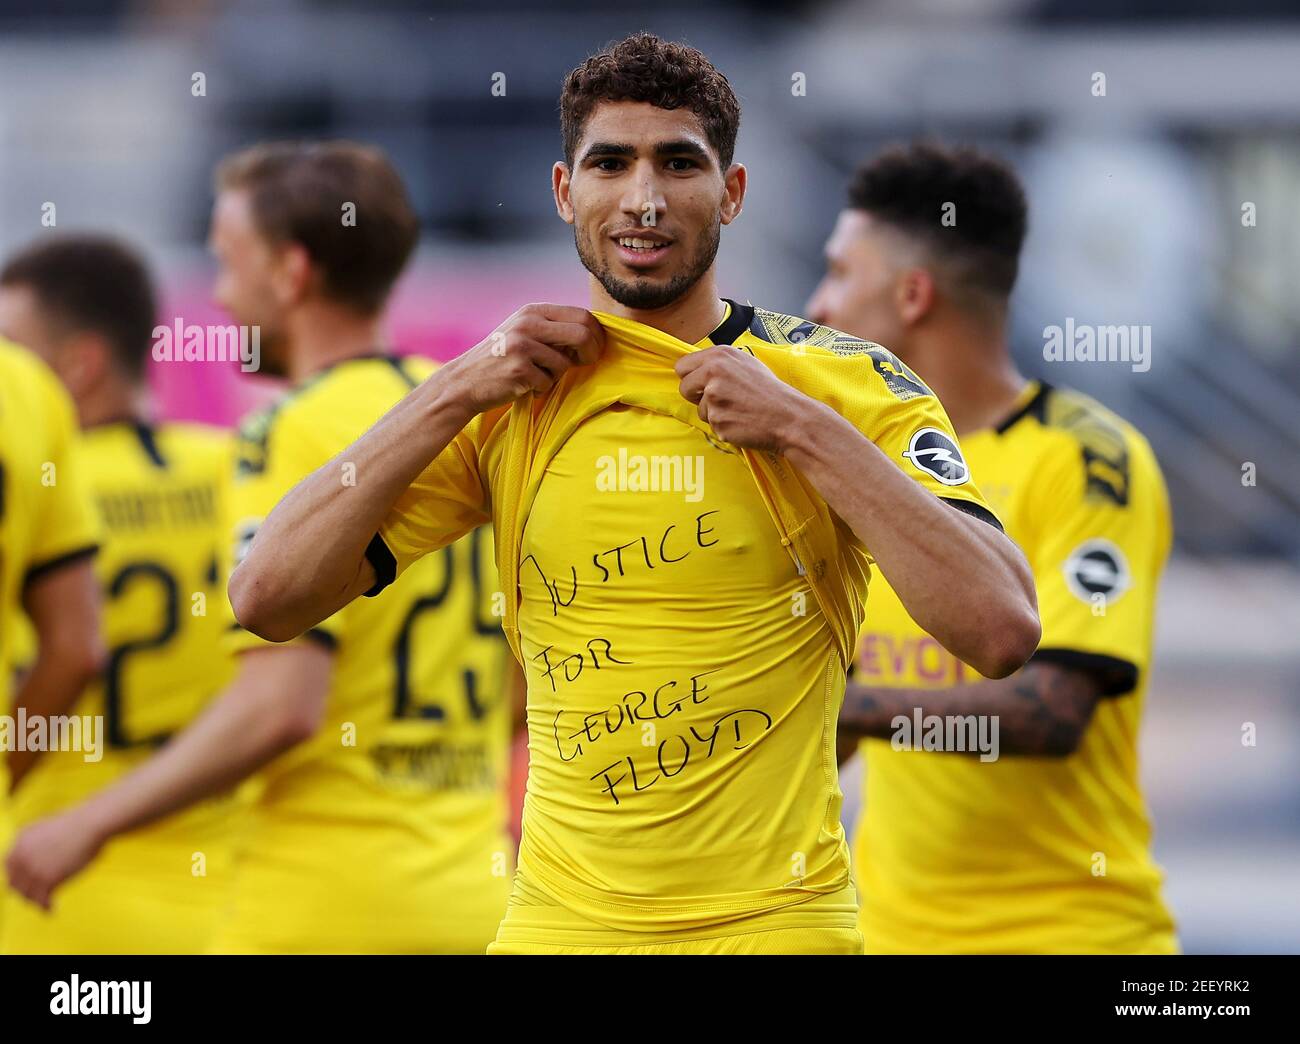 Soccer Football - Bundesliga - SC Paderborn v Borussia Dortmund - Benteler Arena, Paderborn, Germany - May 31, 2020 Borussia Dortmund's Achraf Hakimi celebrates scoring their fourth goal with a 'Justice for George Floyd' shirt, as play resumes behind closed doors following the outbreak of the coronavirus disease (COVID-19) Lars Baron/Pool via REUTERS   DFL regulations prohibit any use of photographs as image sequences and/or quasi-video Stock Photo